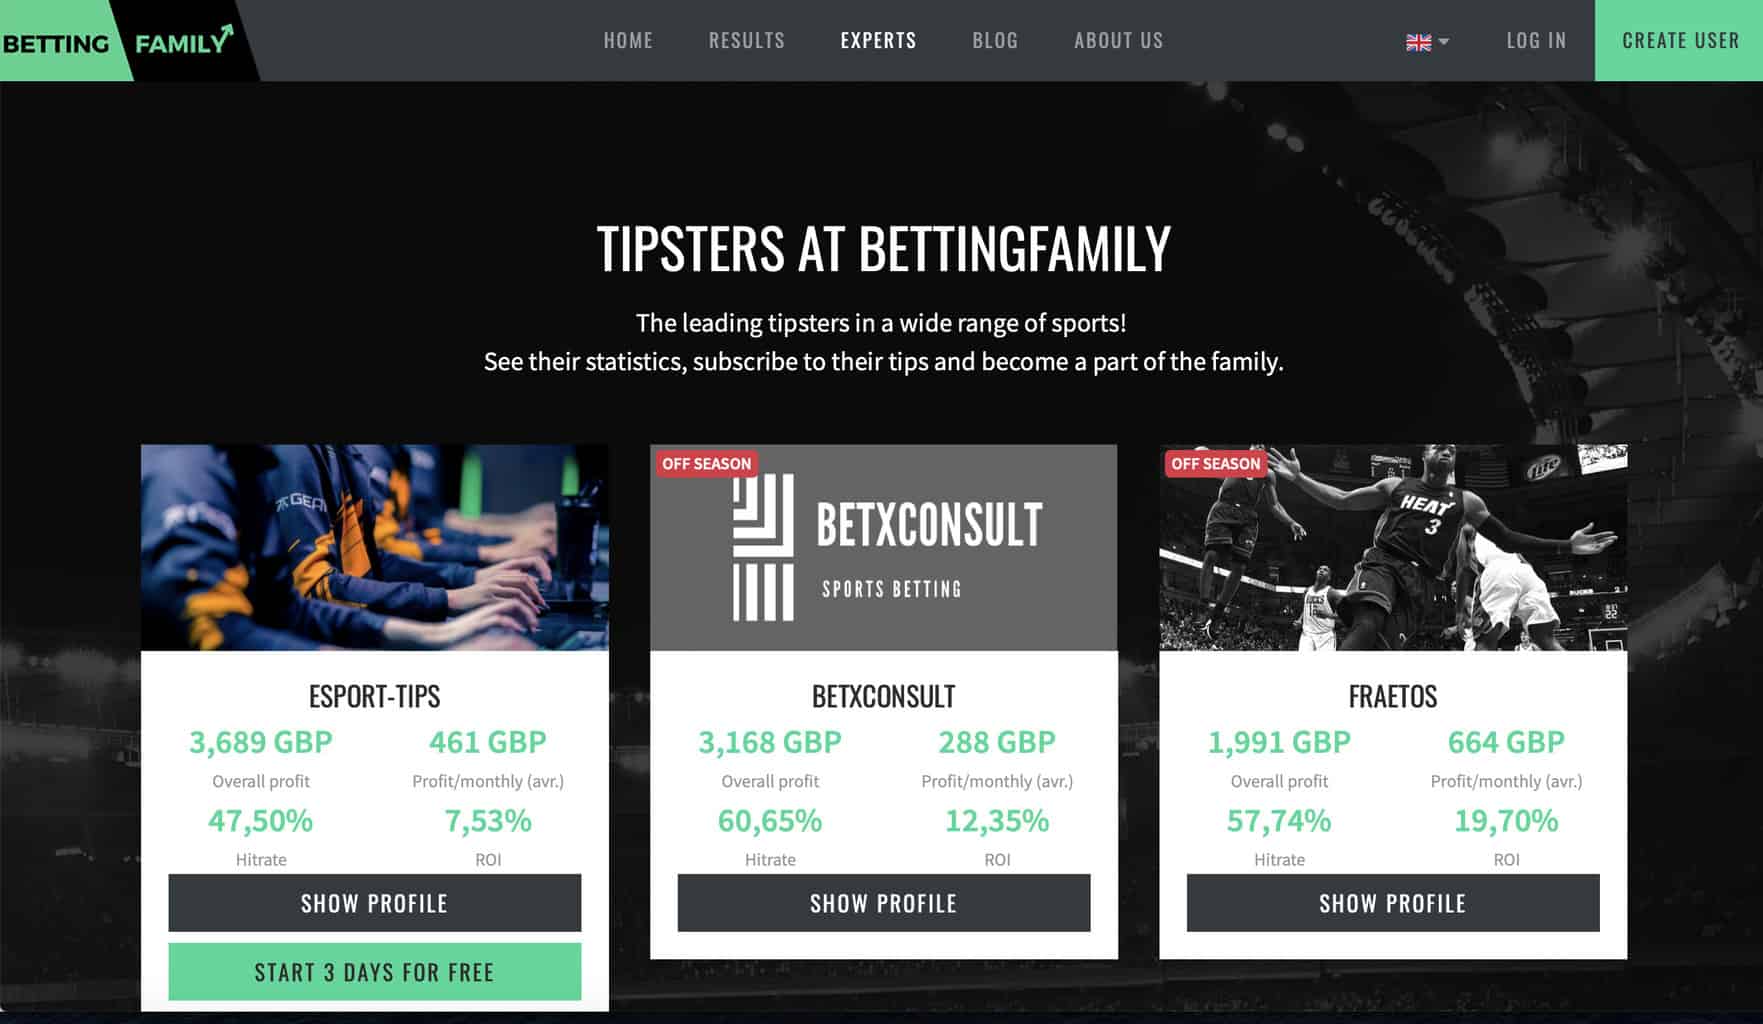 Bettingfamily - Tipsters